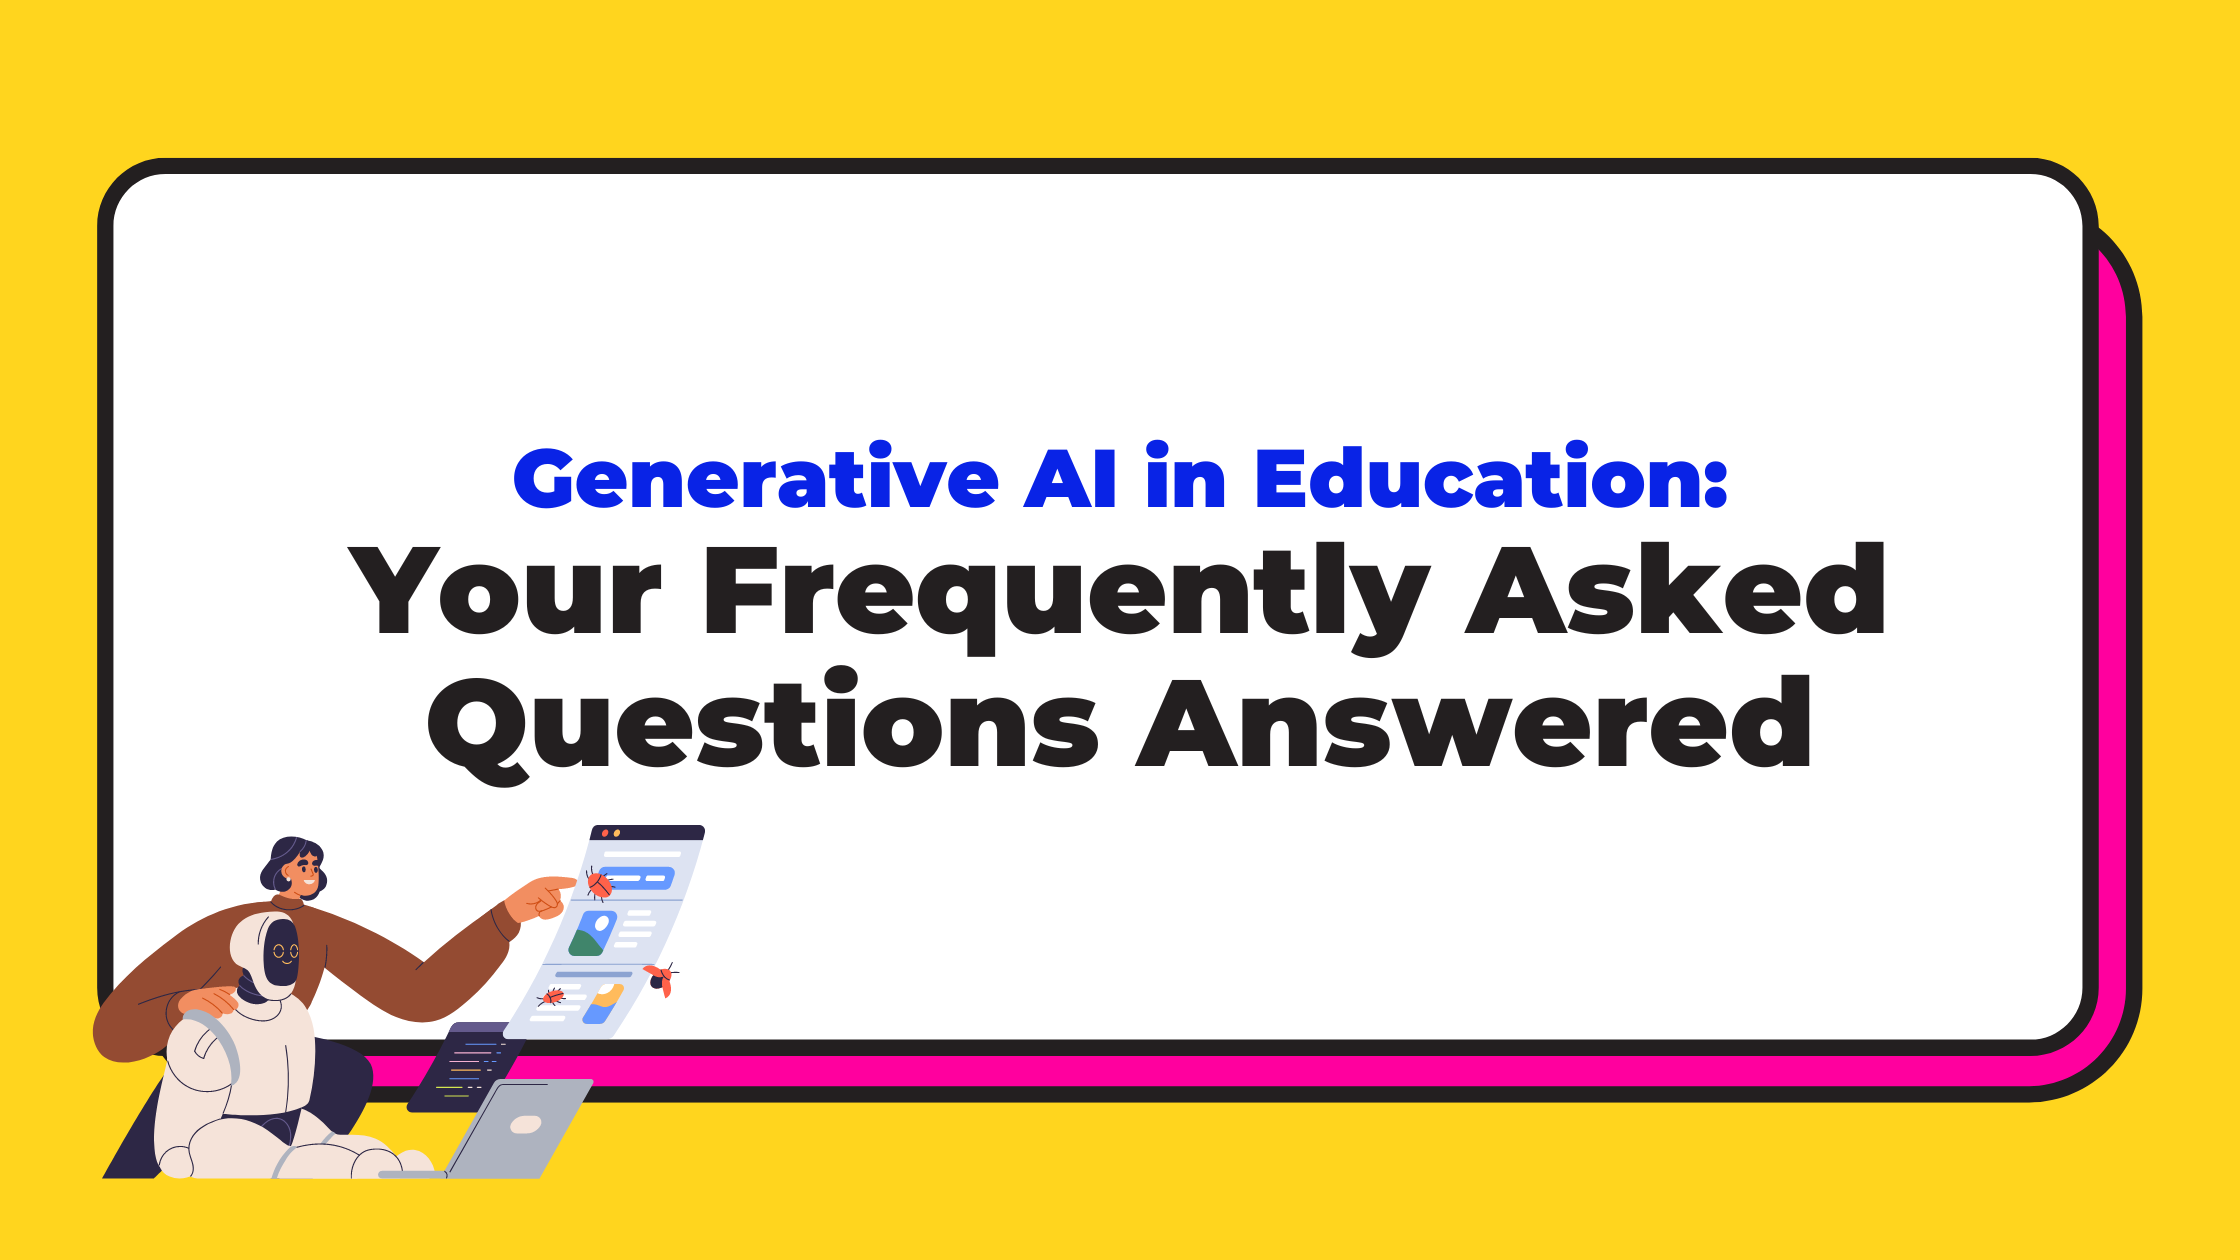 generative-ai-education-frequently-asked-questions-answered